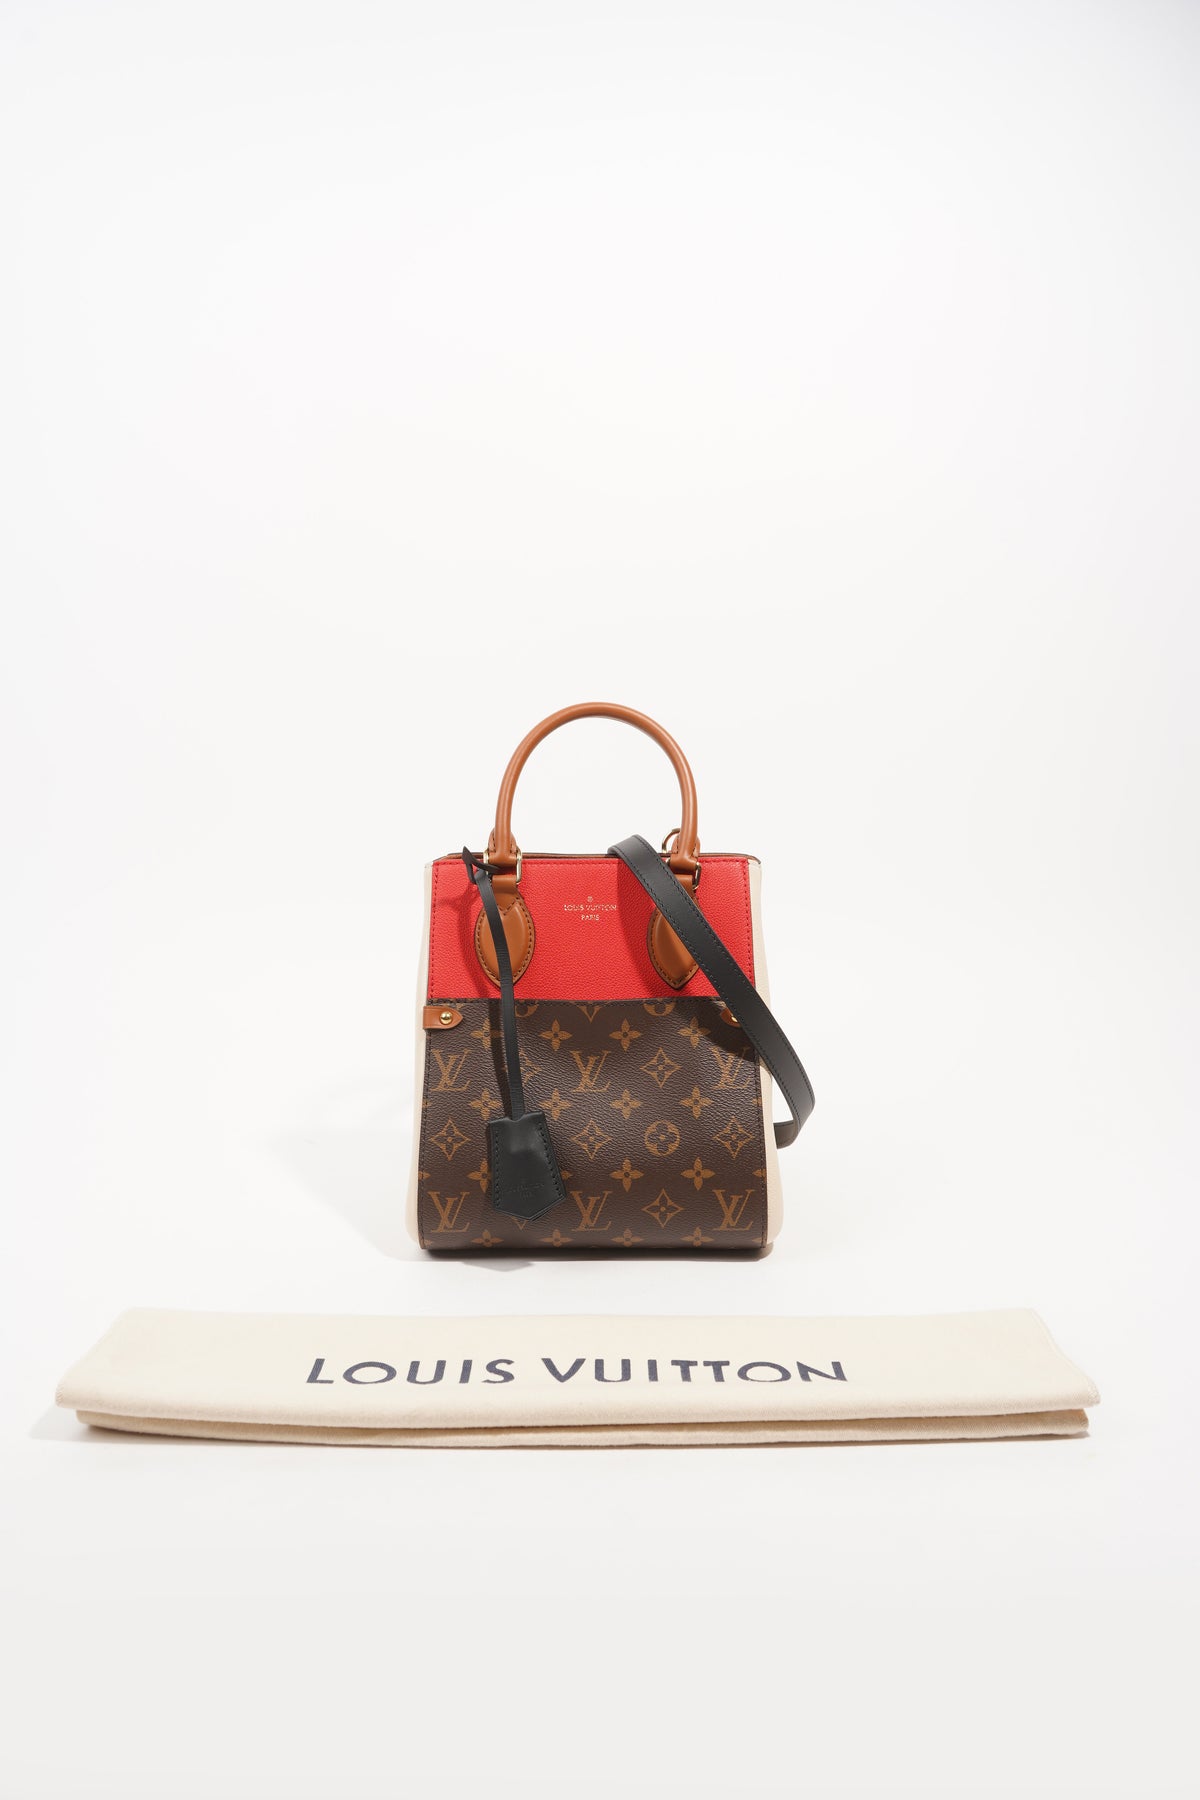 fold tote pm louis vuittons